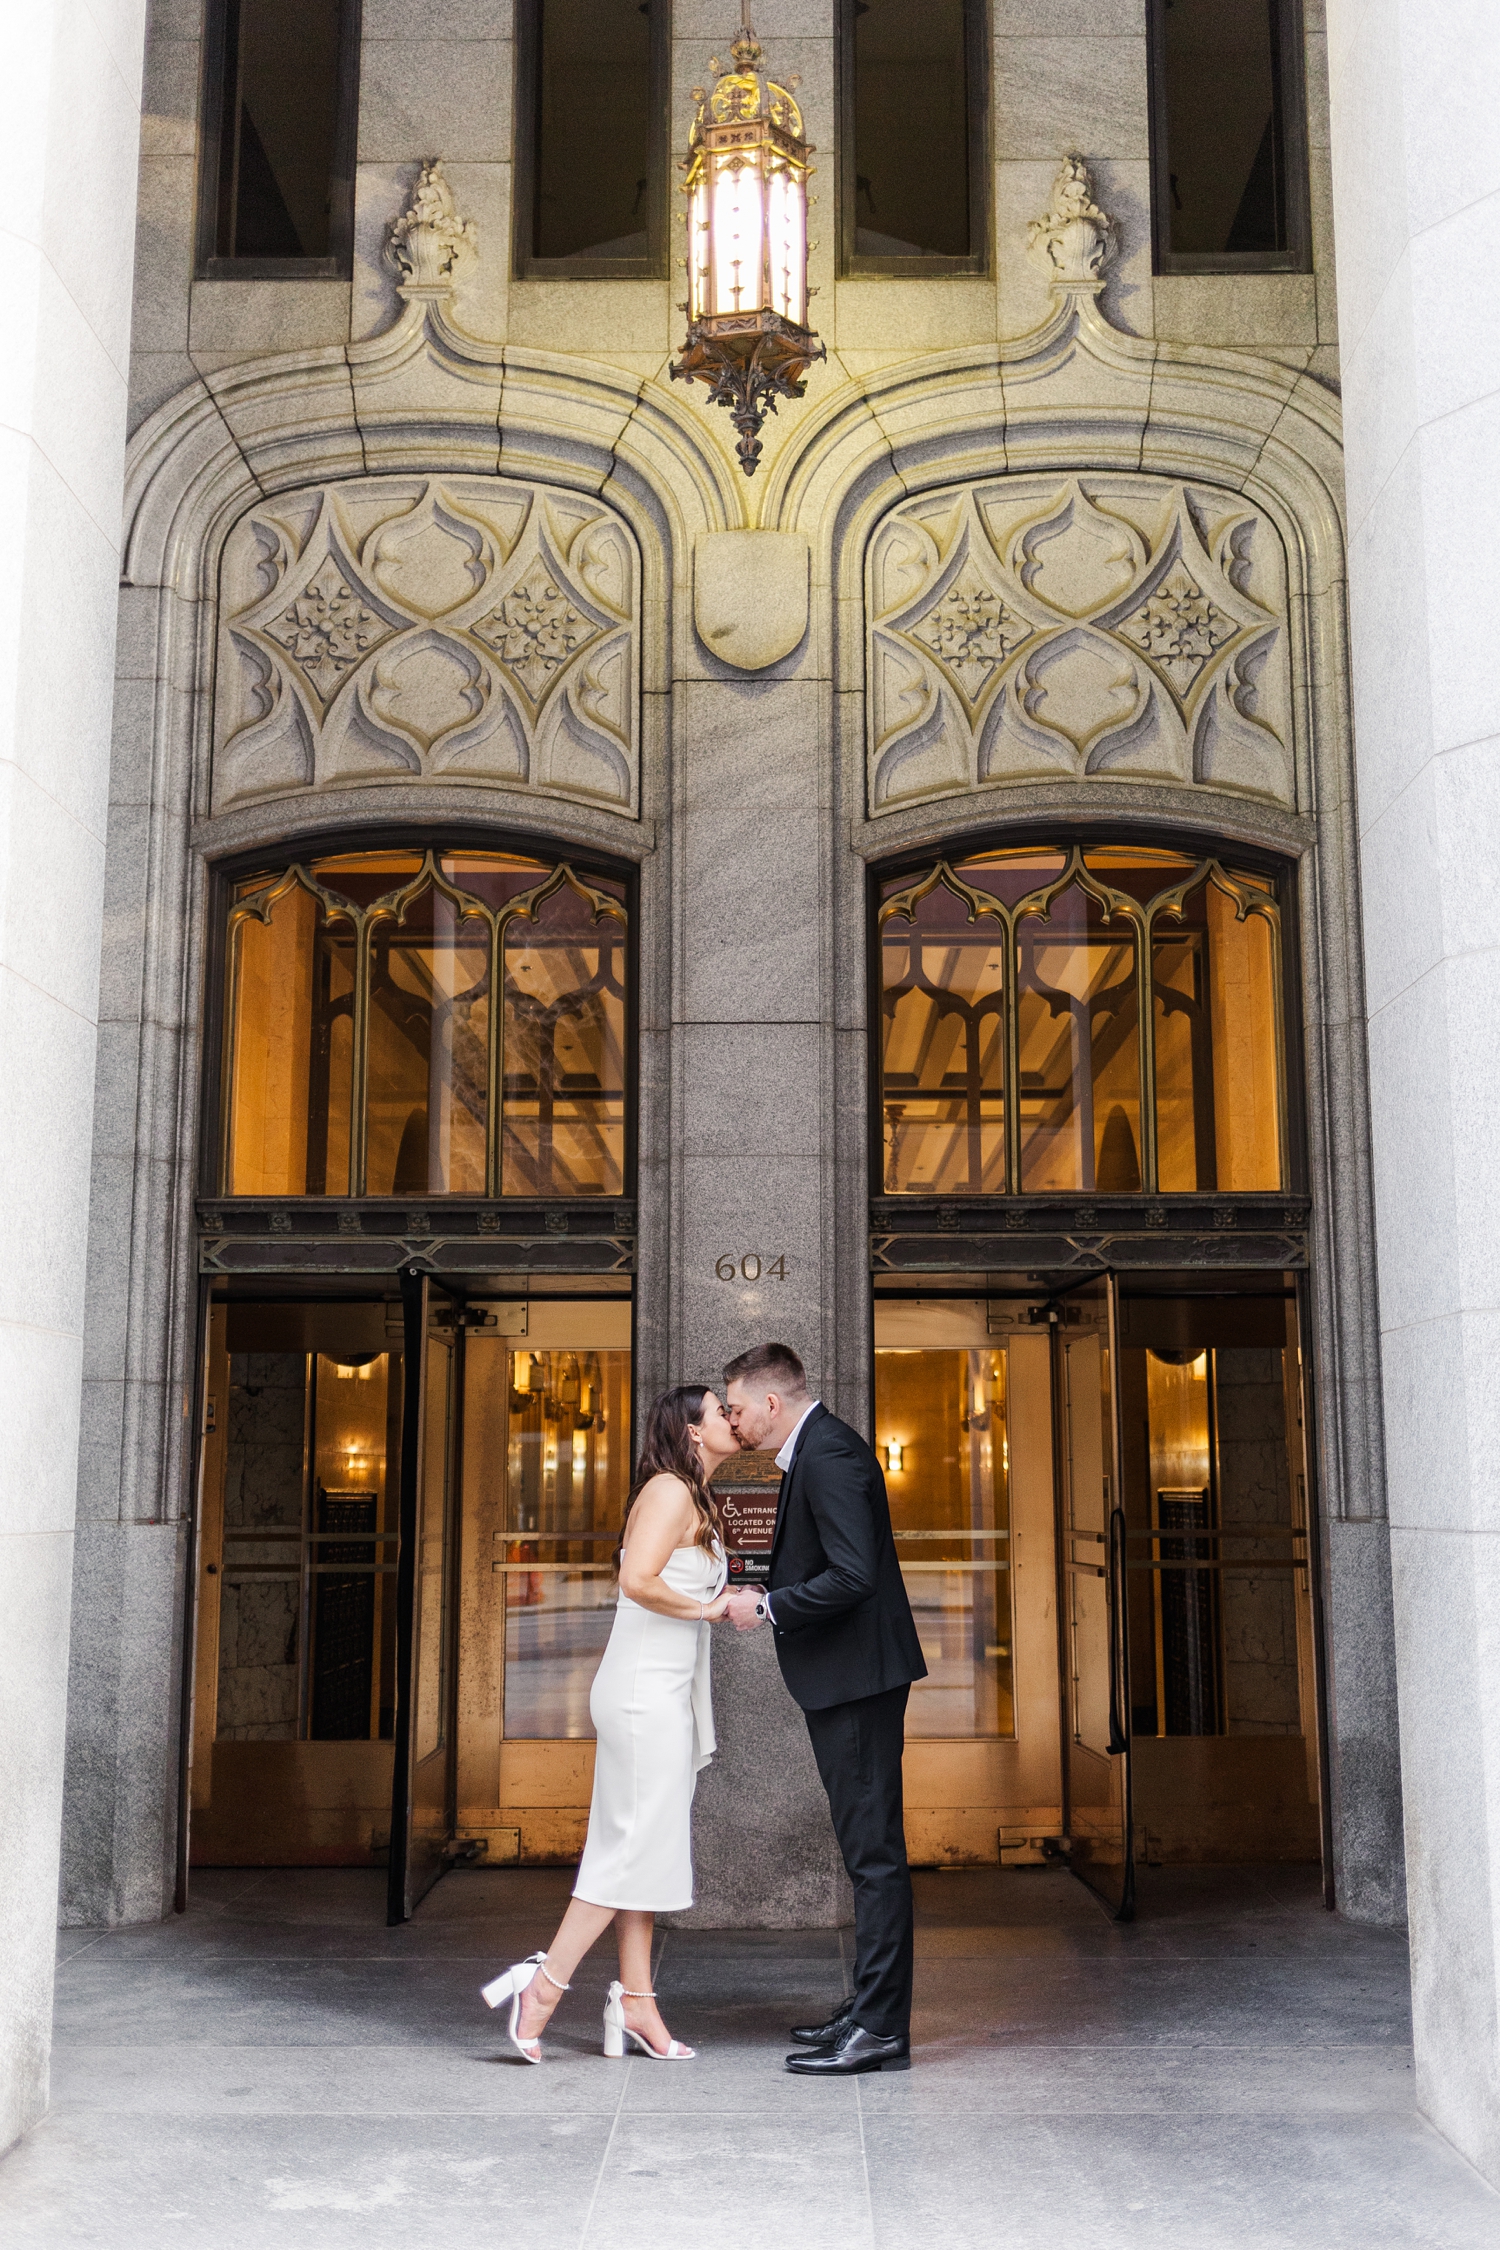 Jenna and Dustin share a kiss in front of The Equitable Building in downtown Des Moines, IA | CB Studio